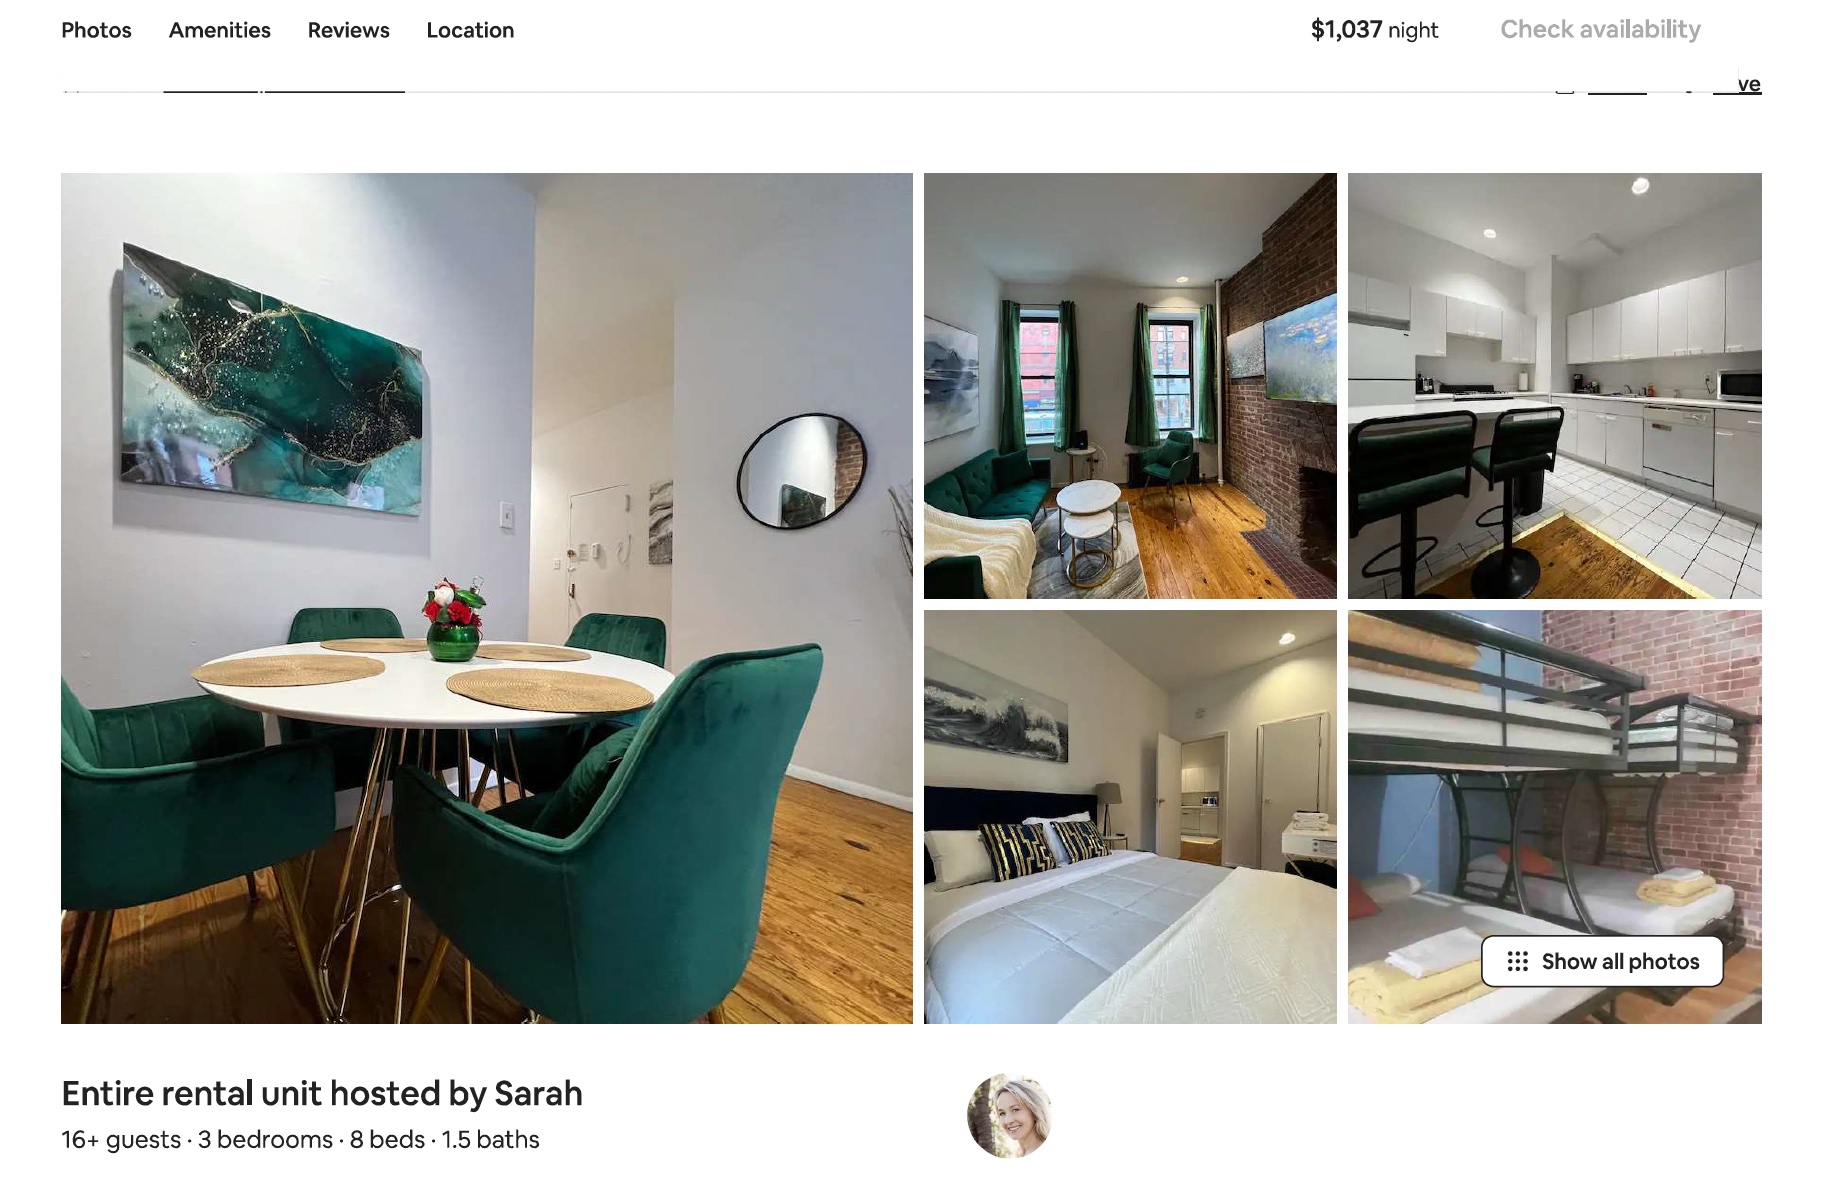 This is an allegedly illegal listing for 207 Columbus Avenue in New York City, according to a lawsuit against Airbnb and a tenant/host. 